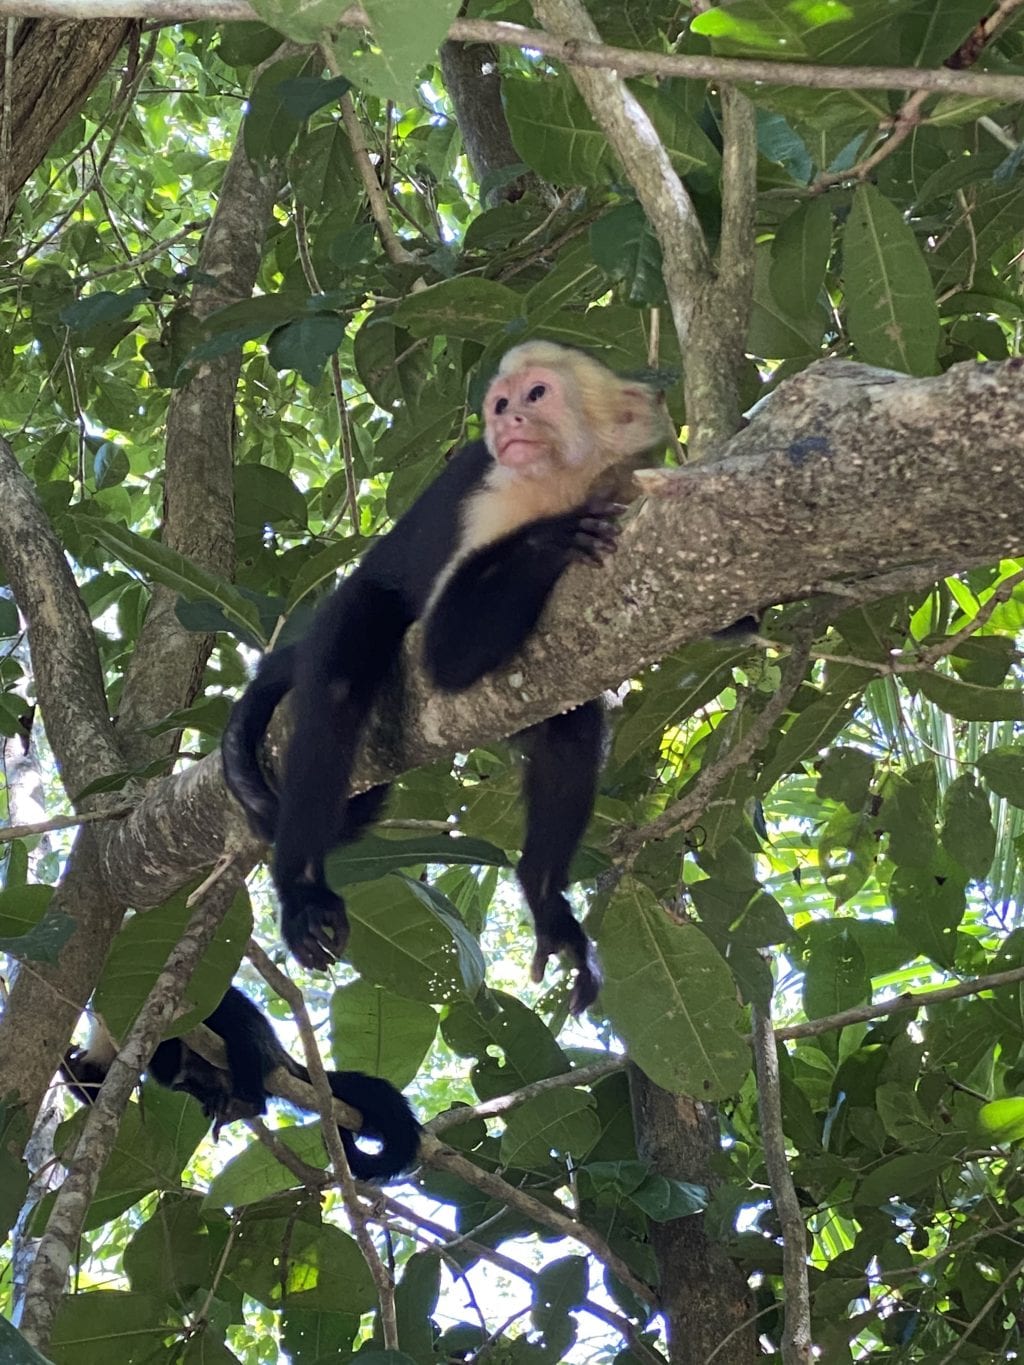 Where-to-see-Monkeys-in-Costa-Rica